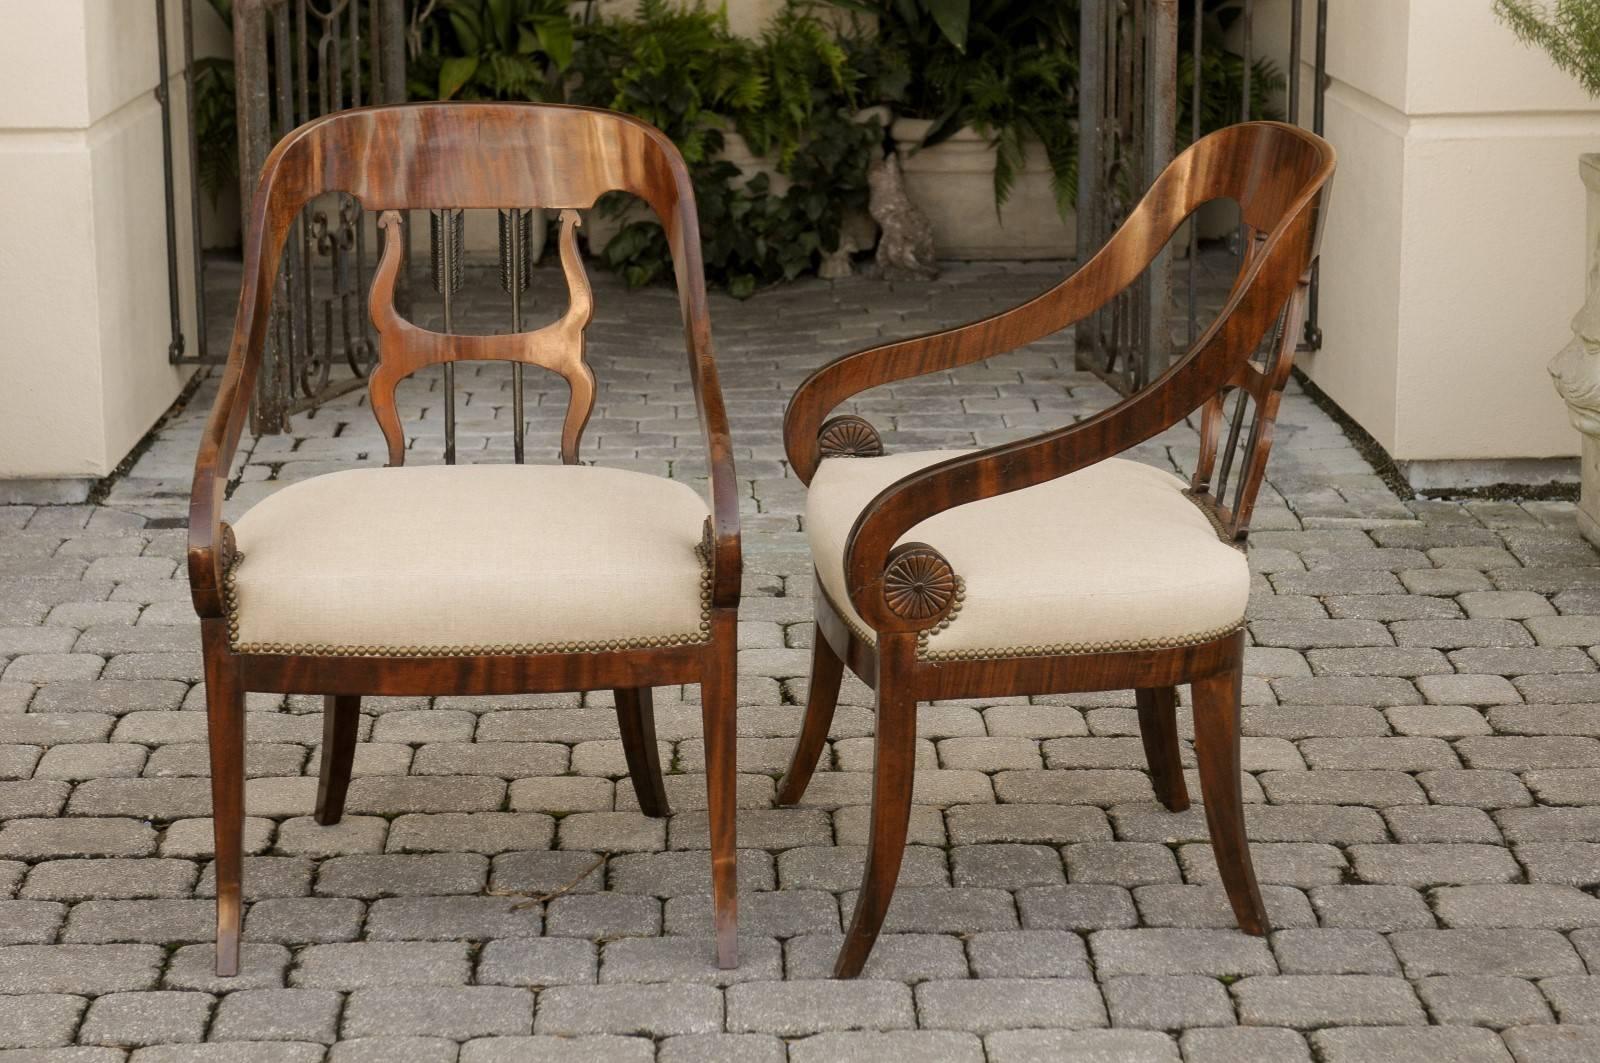 19th Century Pair of Austrian 1860s Biedermeier Armchairs with Arrow Motifs and Scrolled Arms